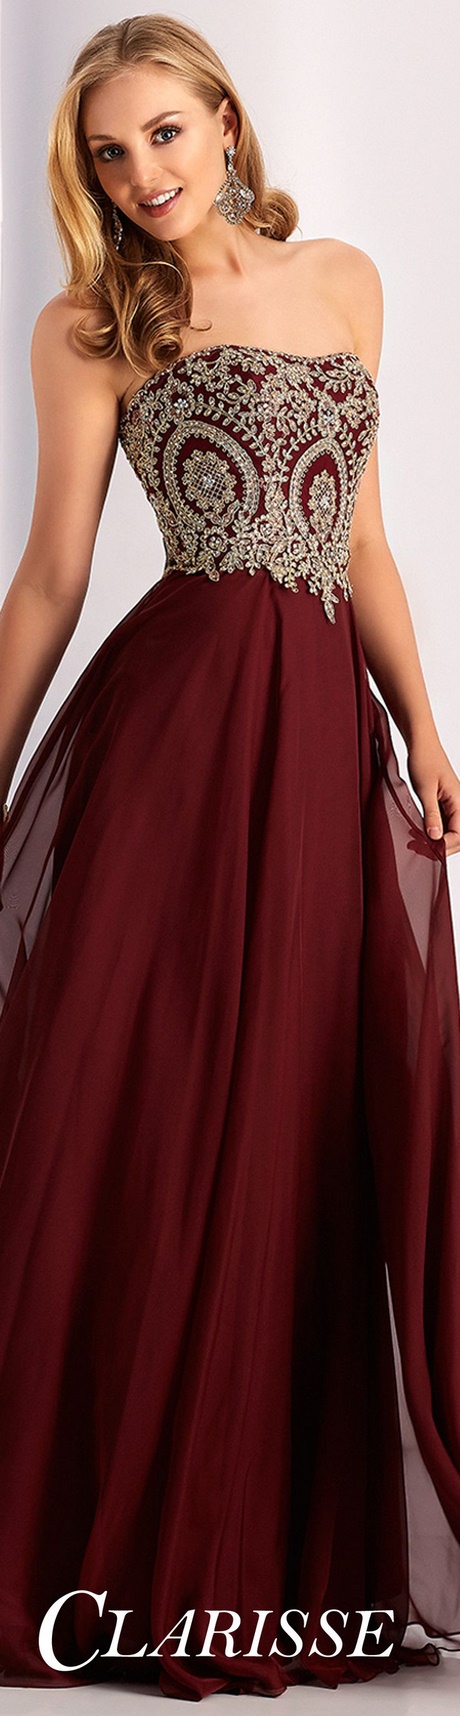 places-to-get-homecoming-dresses-near-me-27_14 Places to get homecoming dresses near me